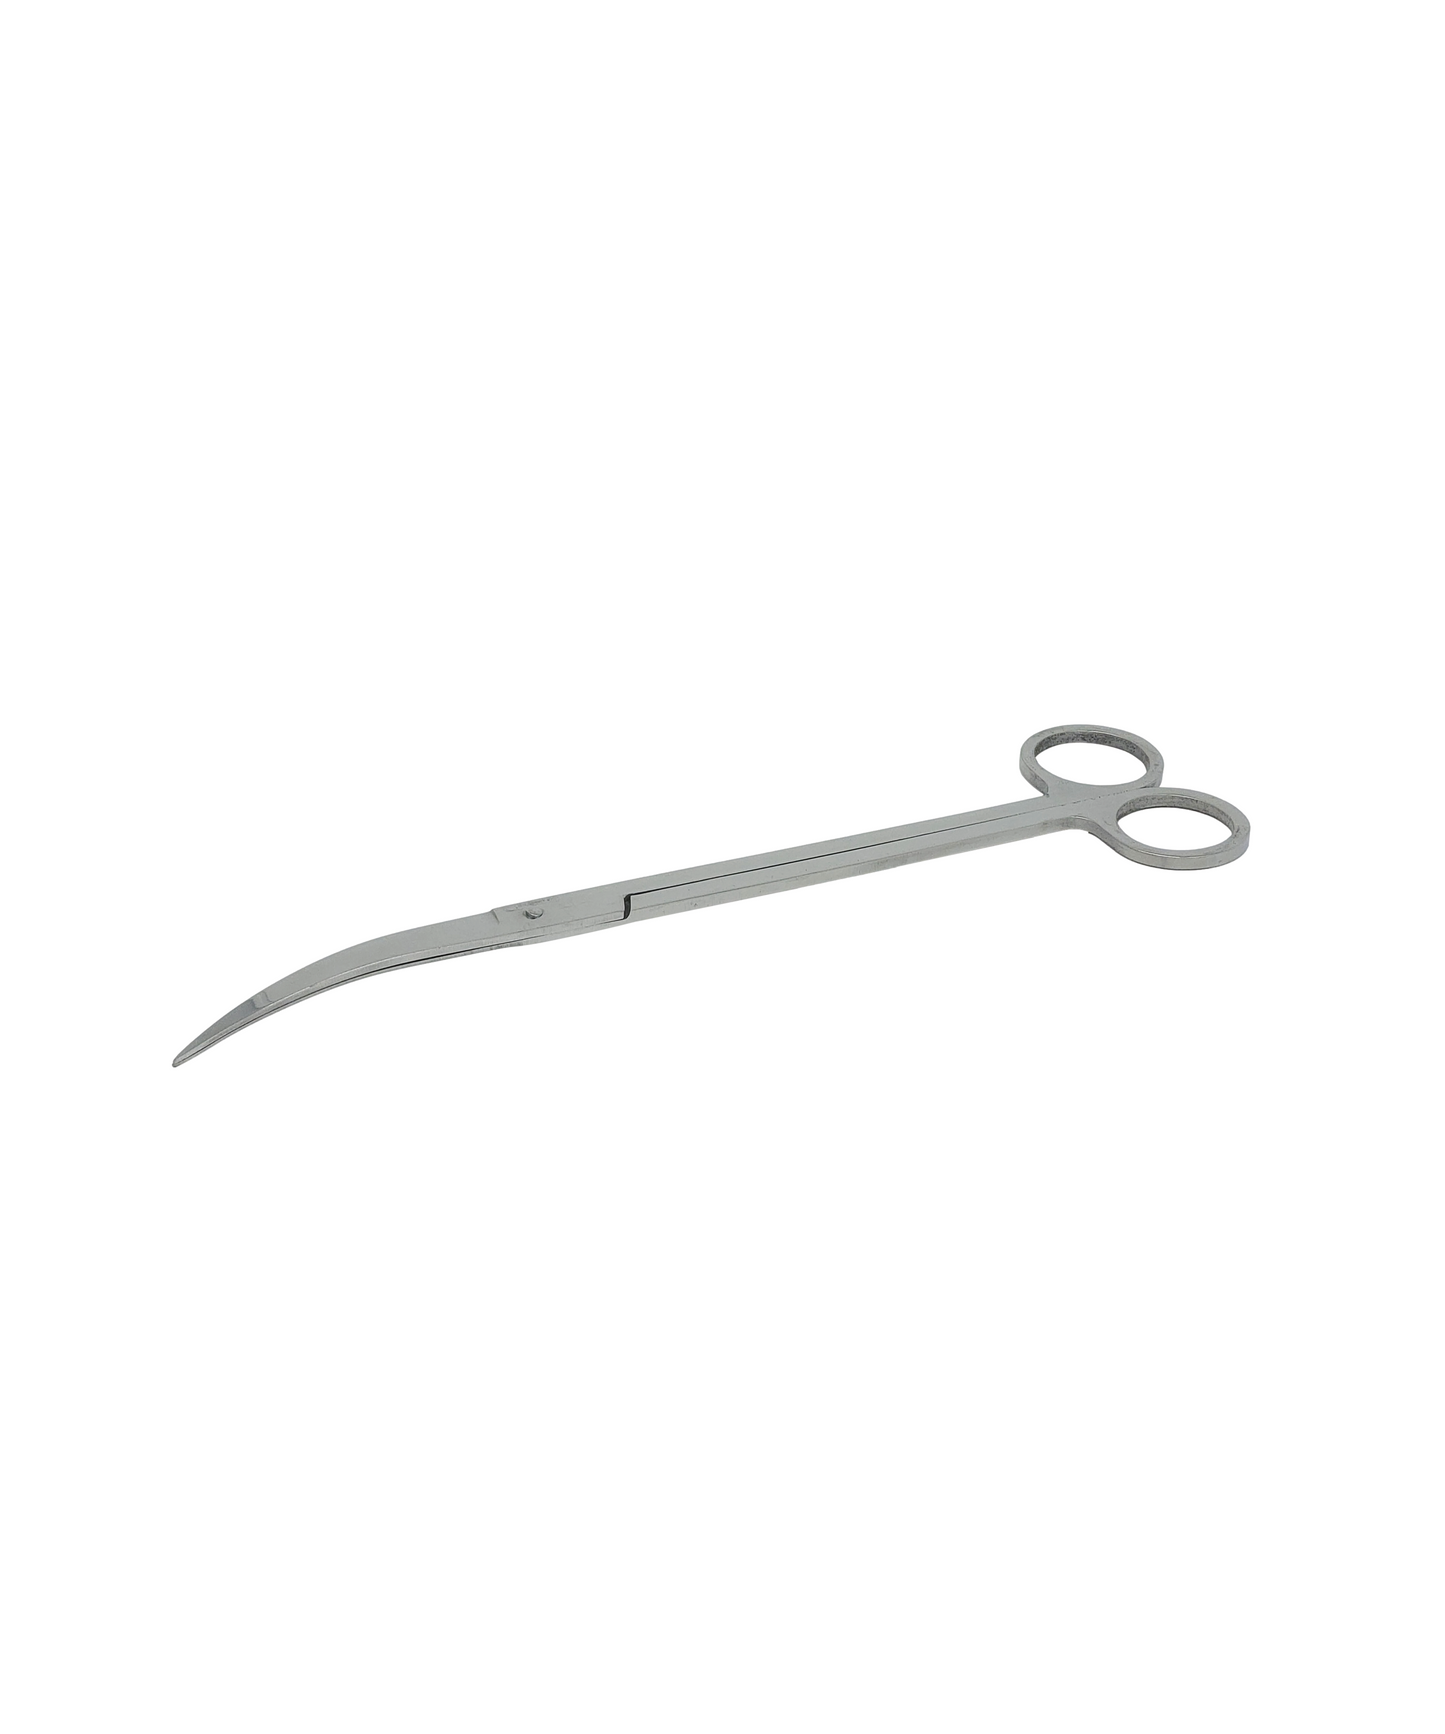 Stainless Scissors Curved, 25cm